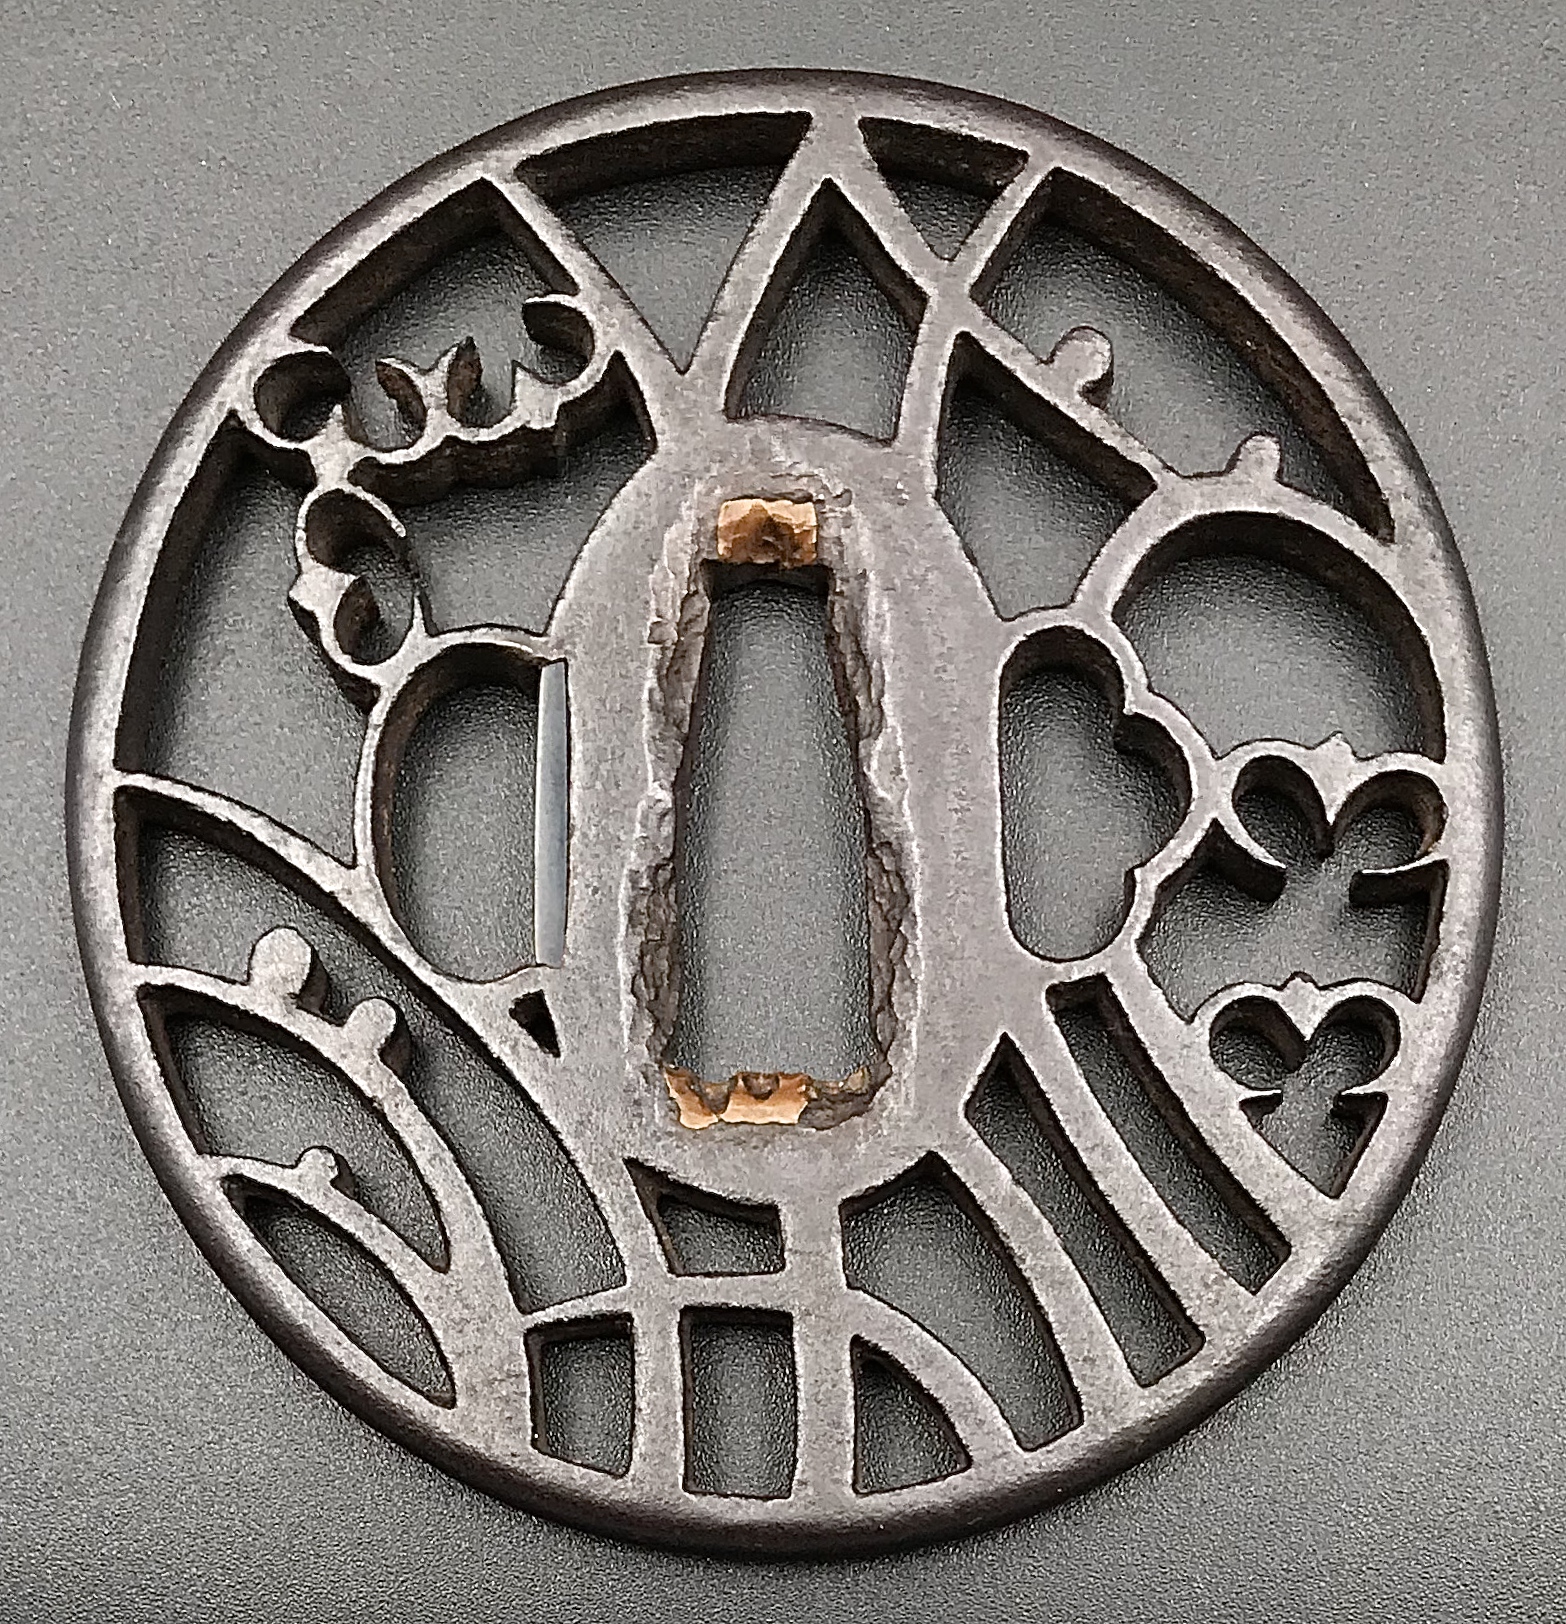 Owari tsuba with wild geese and dewdrops on pampas grass motif